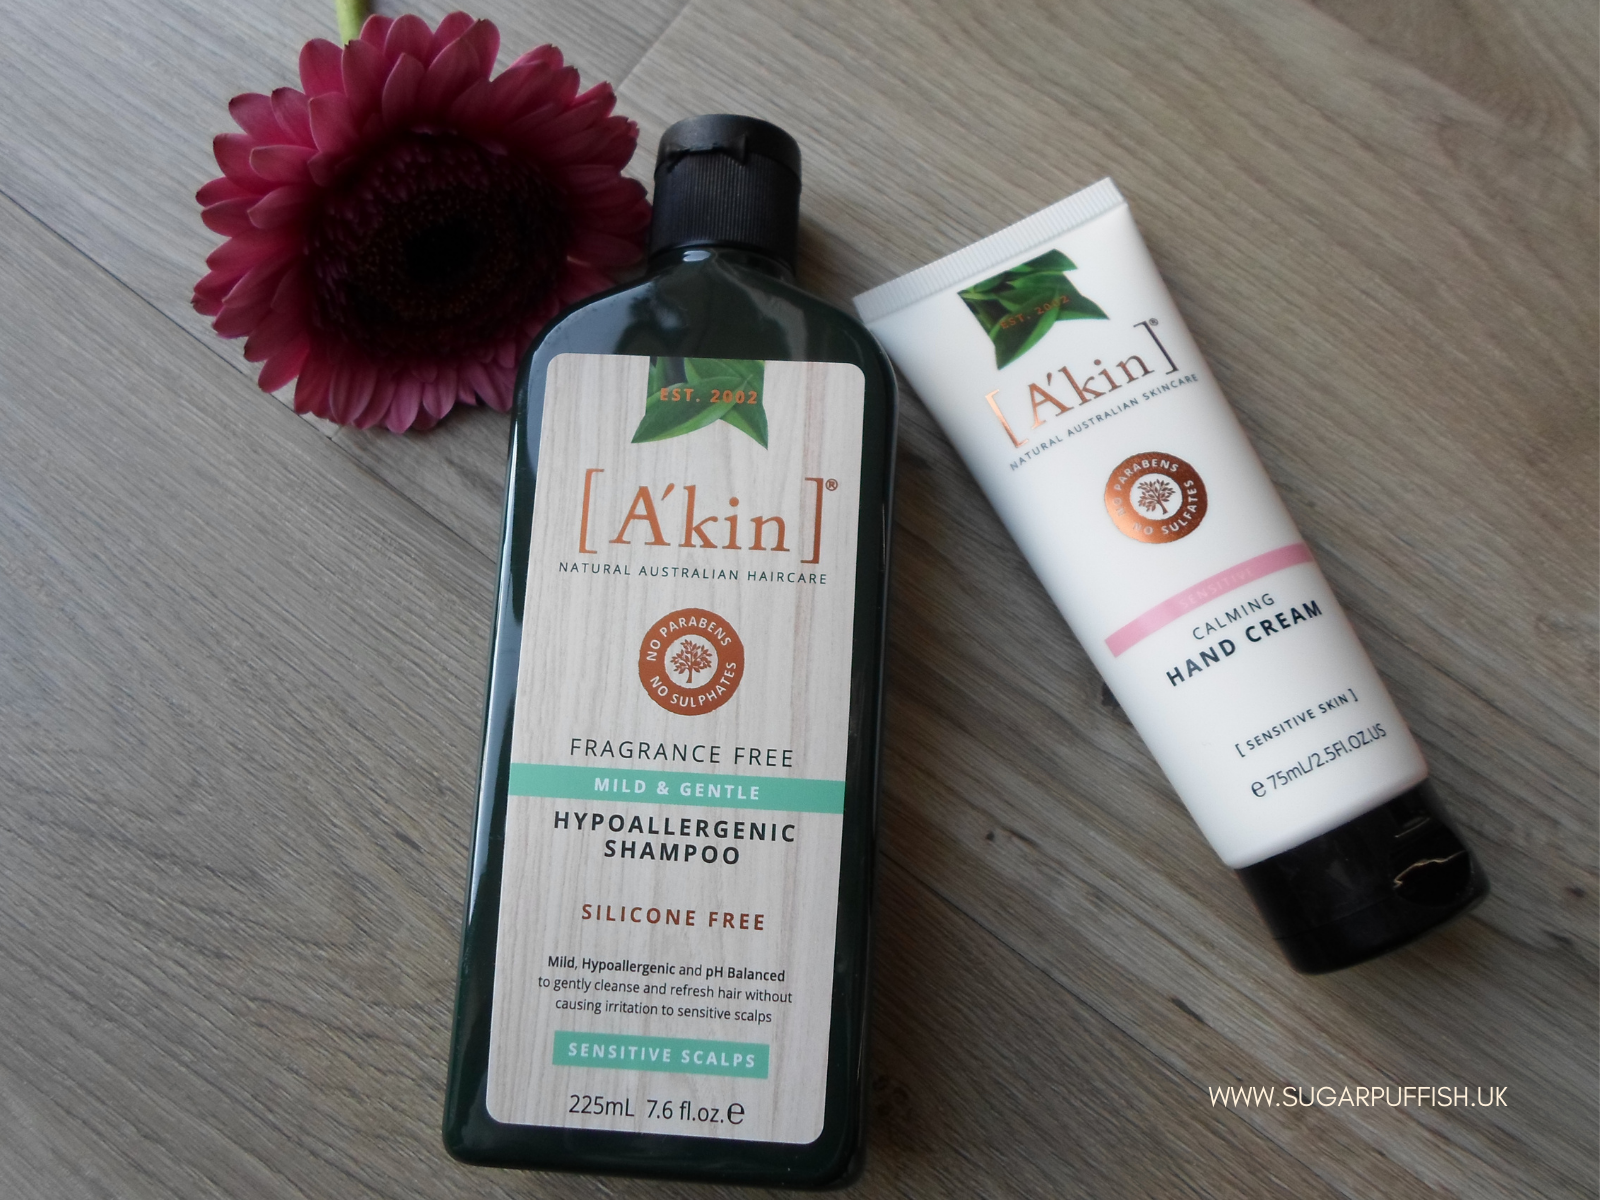 Review A'kin Mild & Gentle Fragrance Free Shampoo and Calming Hand Cream